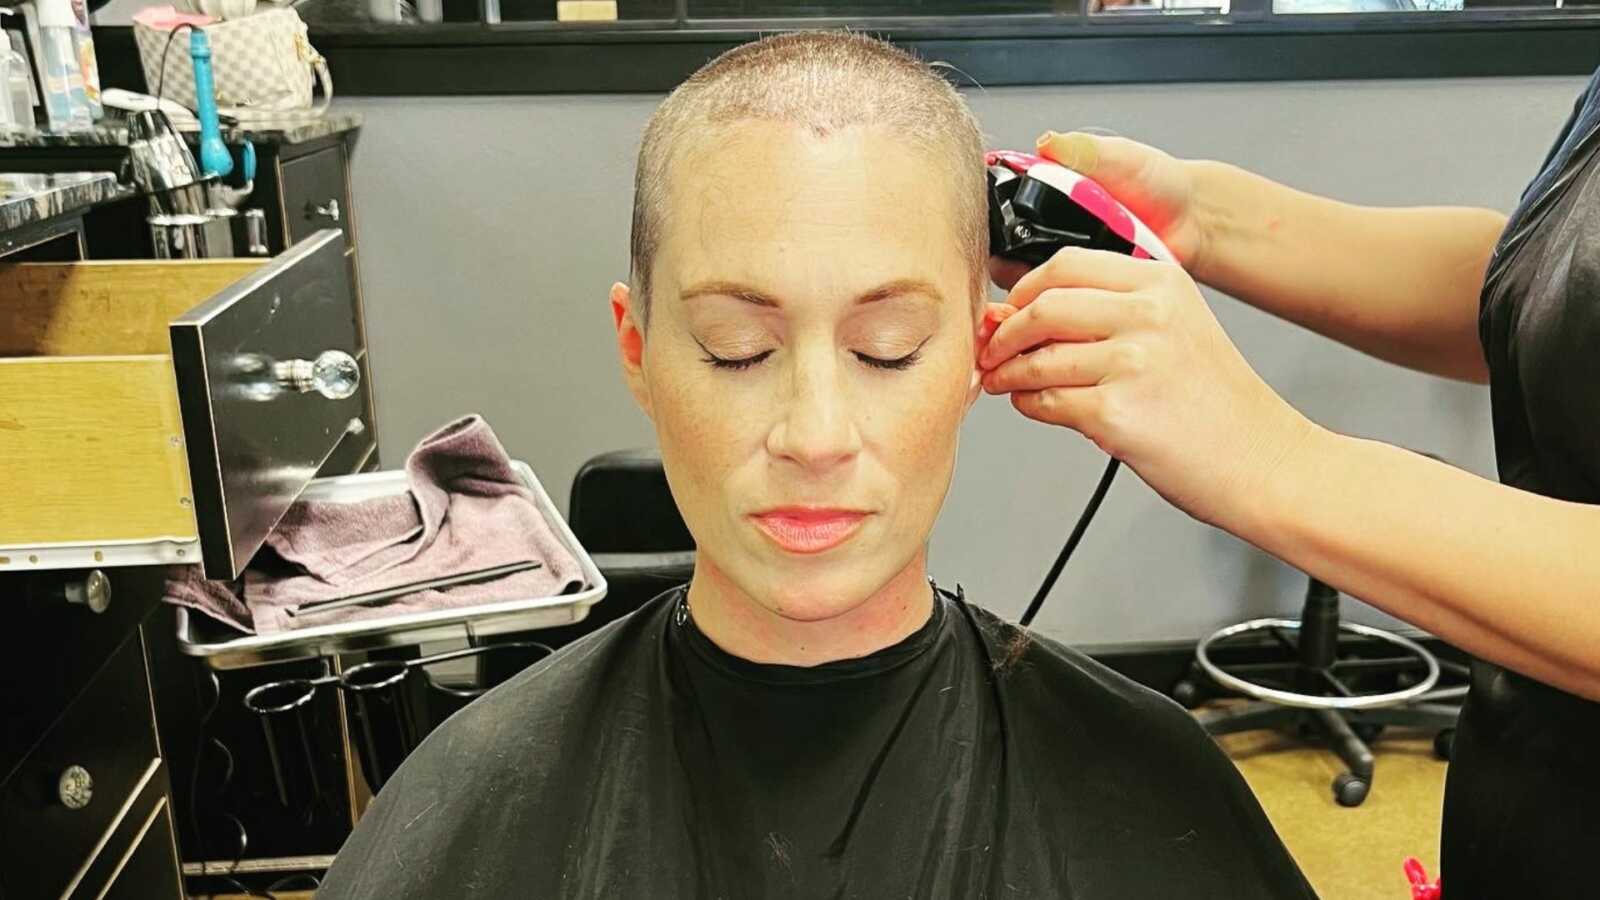 Breast cancer patient getting head shaved in hair salon